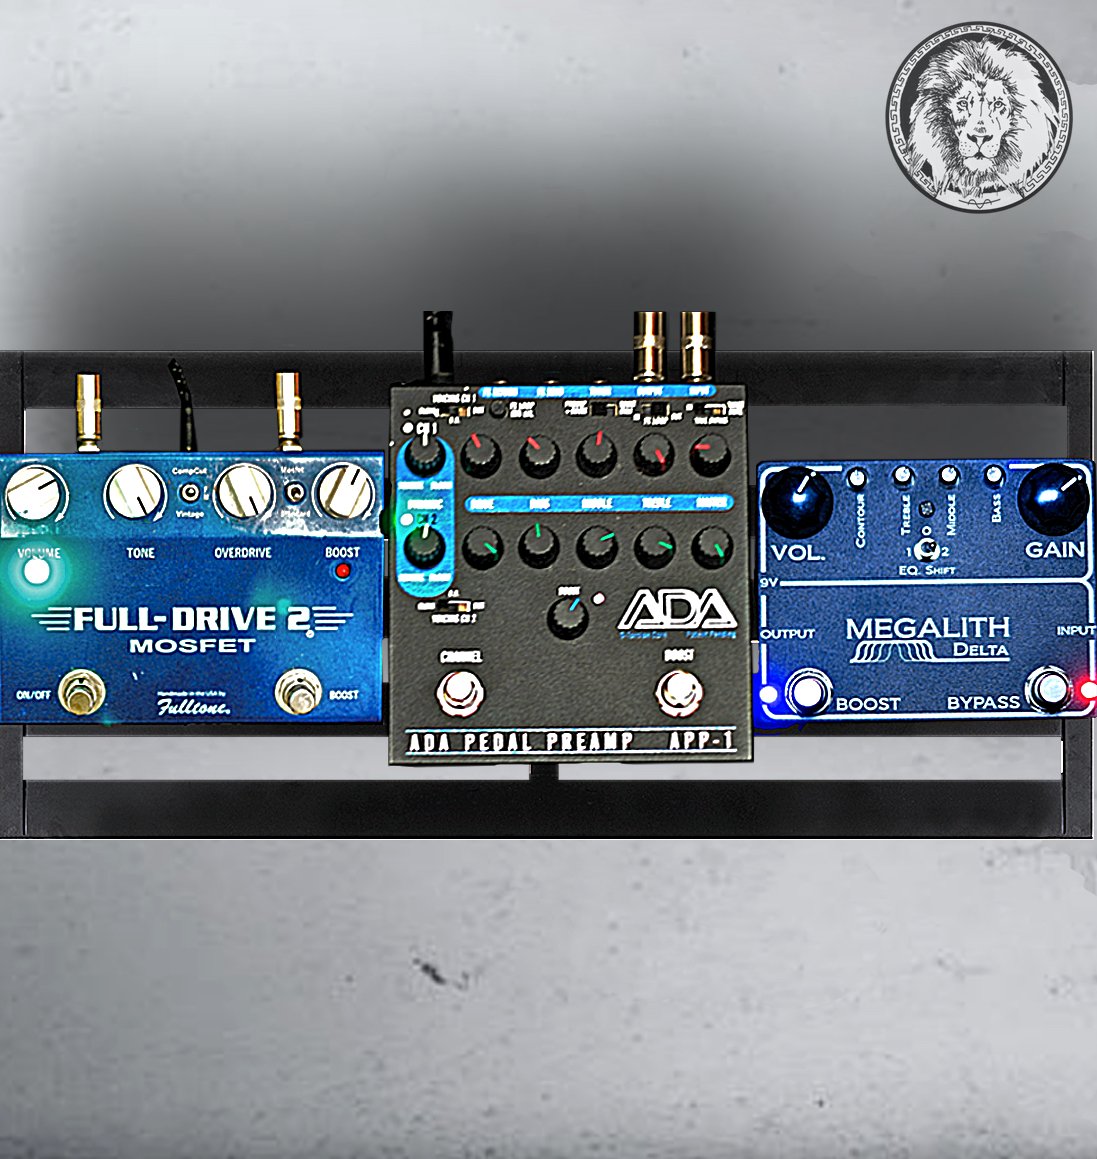 3 in 1 - Megalith Delta Pedal,ADA APP-1 D-Torsion Core Preamp and Fulltone  Full-Drive 2 Mosfet OD